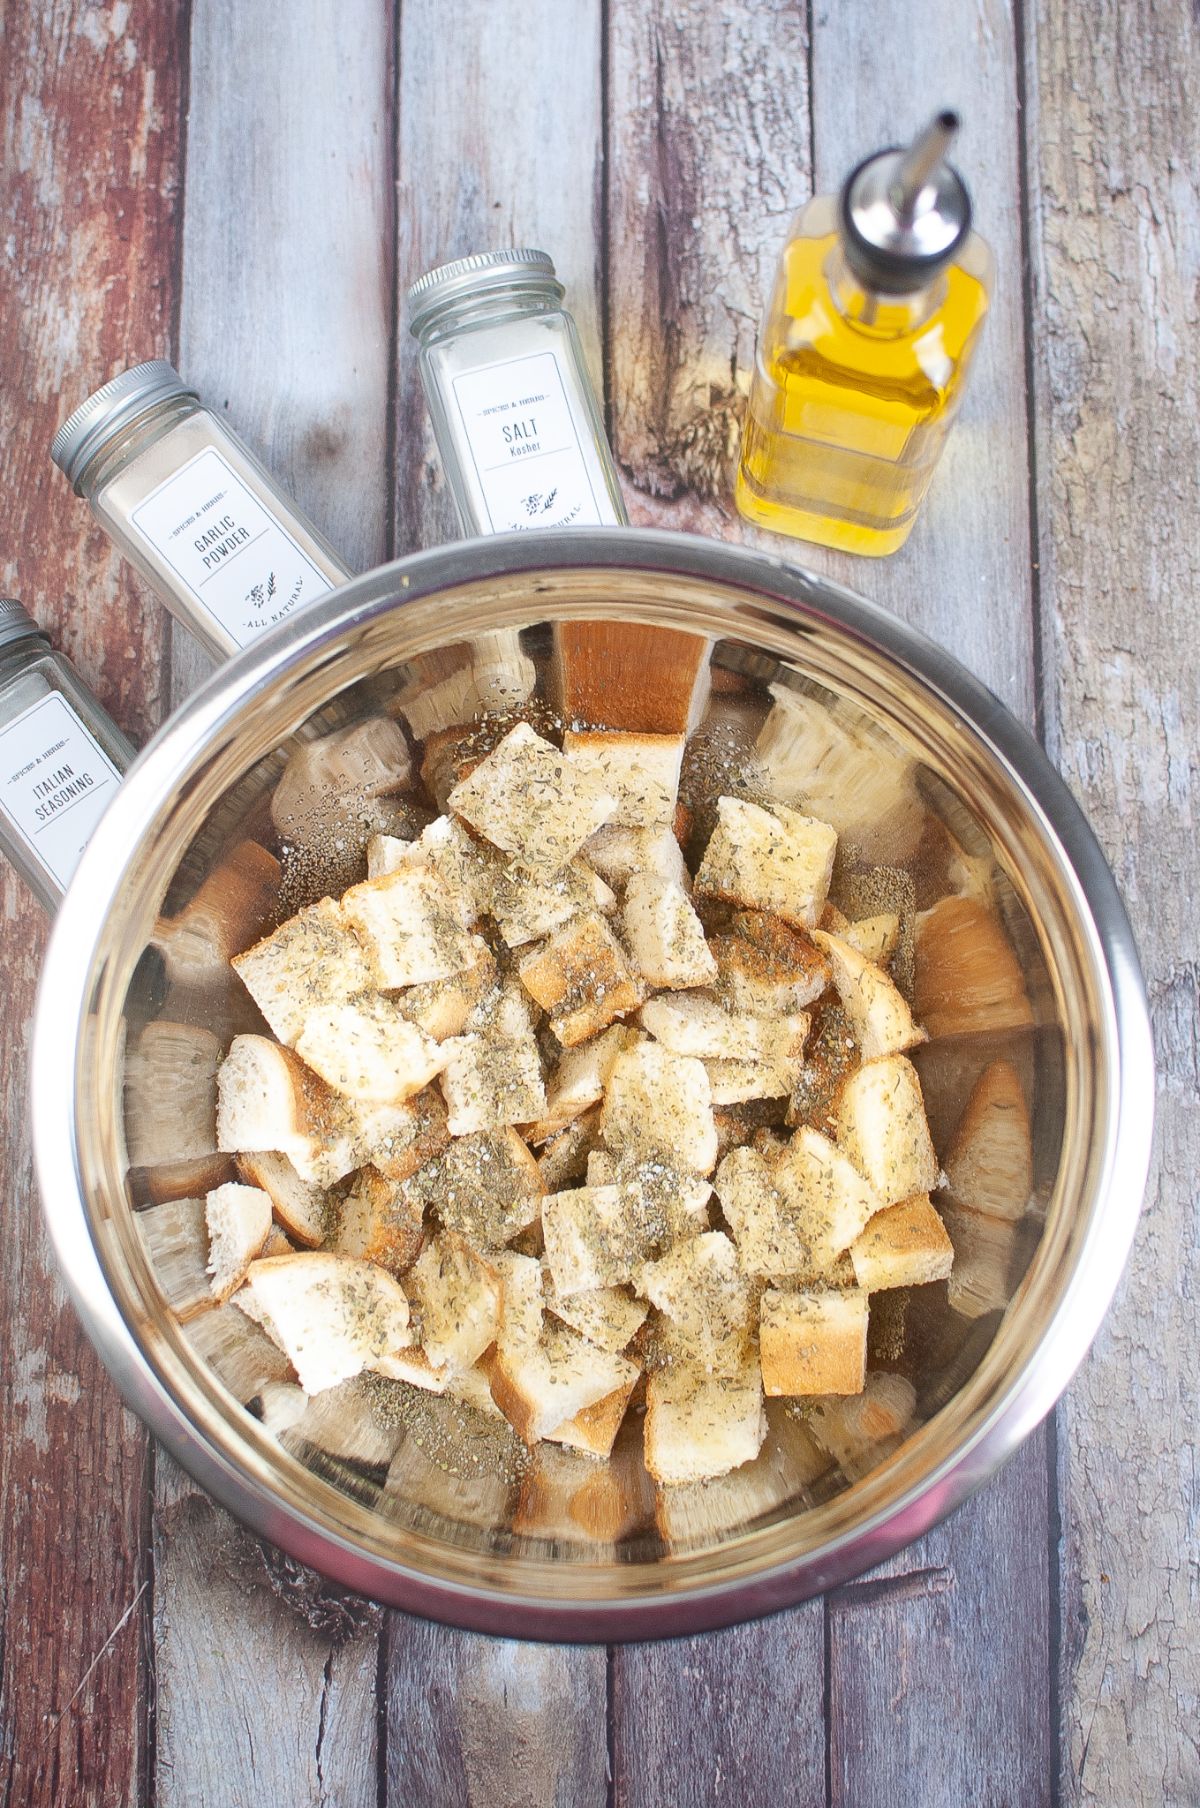 Cubed bread and seasonings in a large mixing bowl.